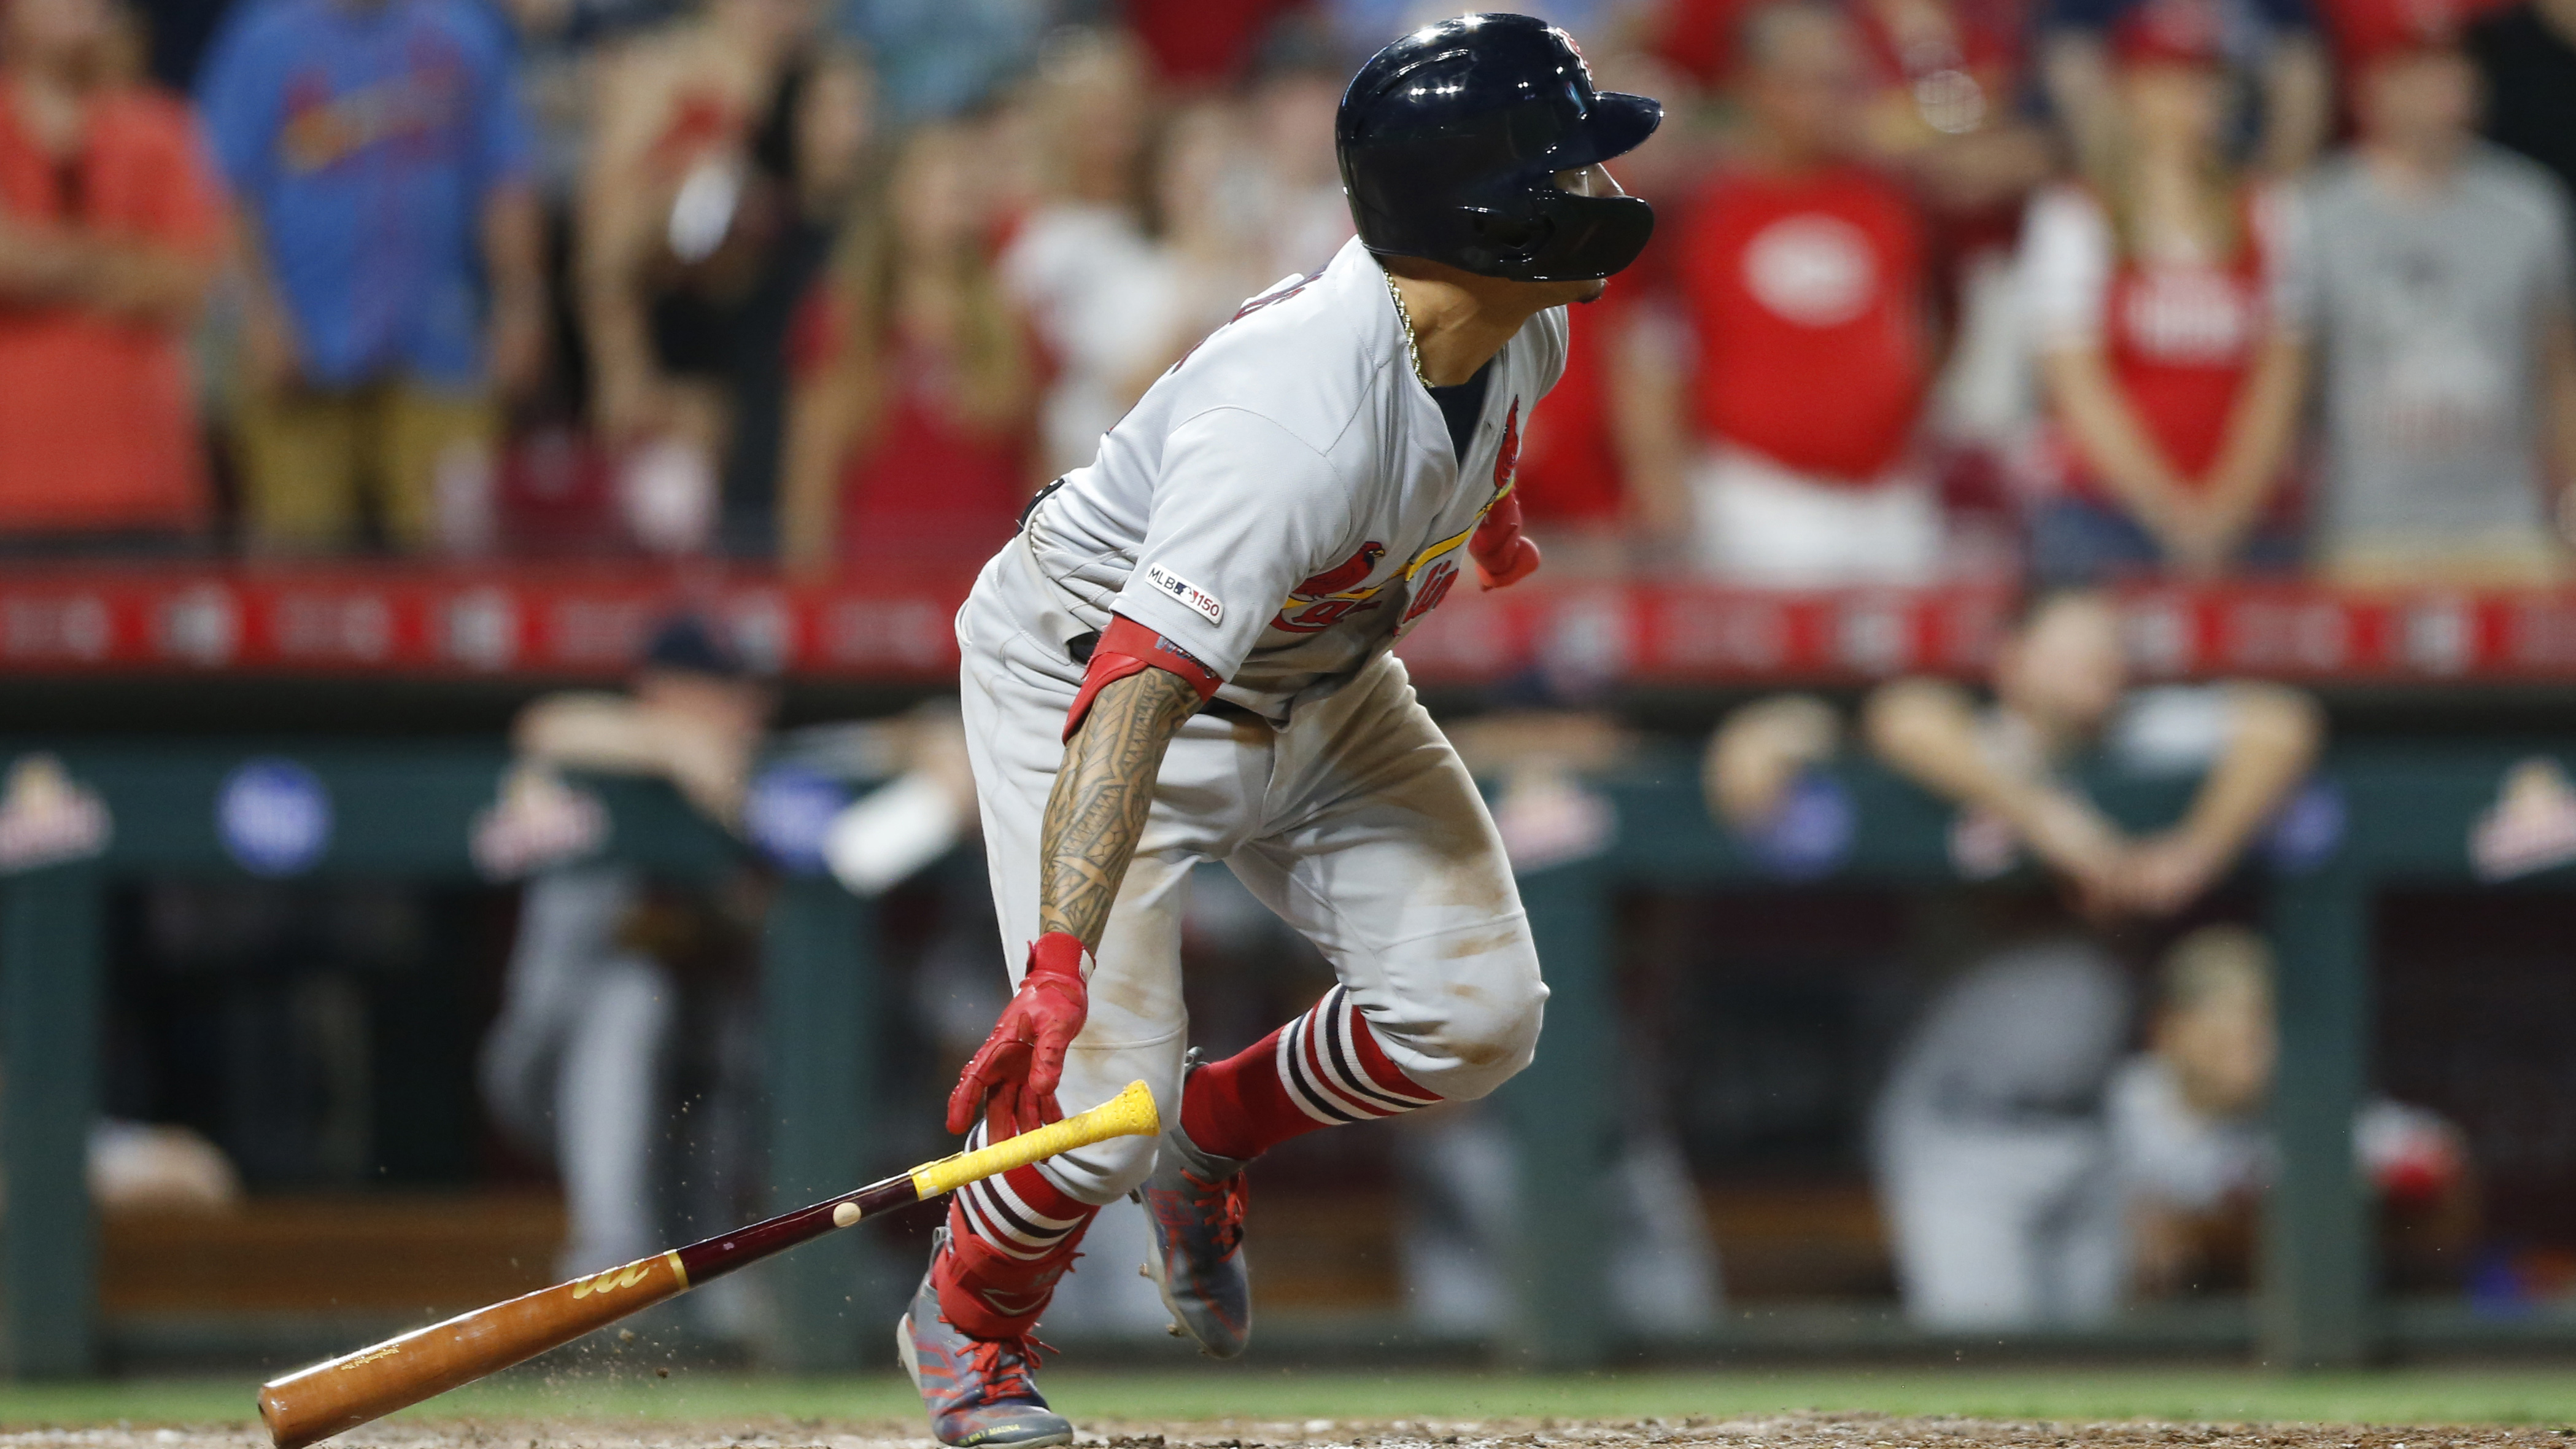 Cardinals' winning streak snapped at five games with 2-1 loss to Reds